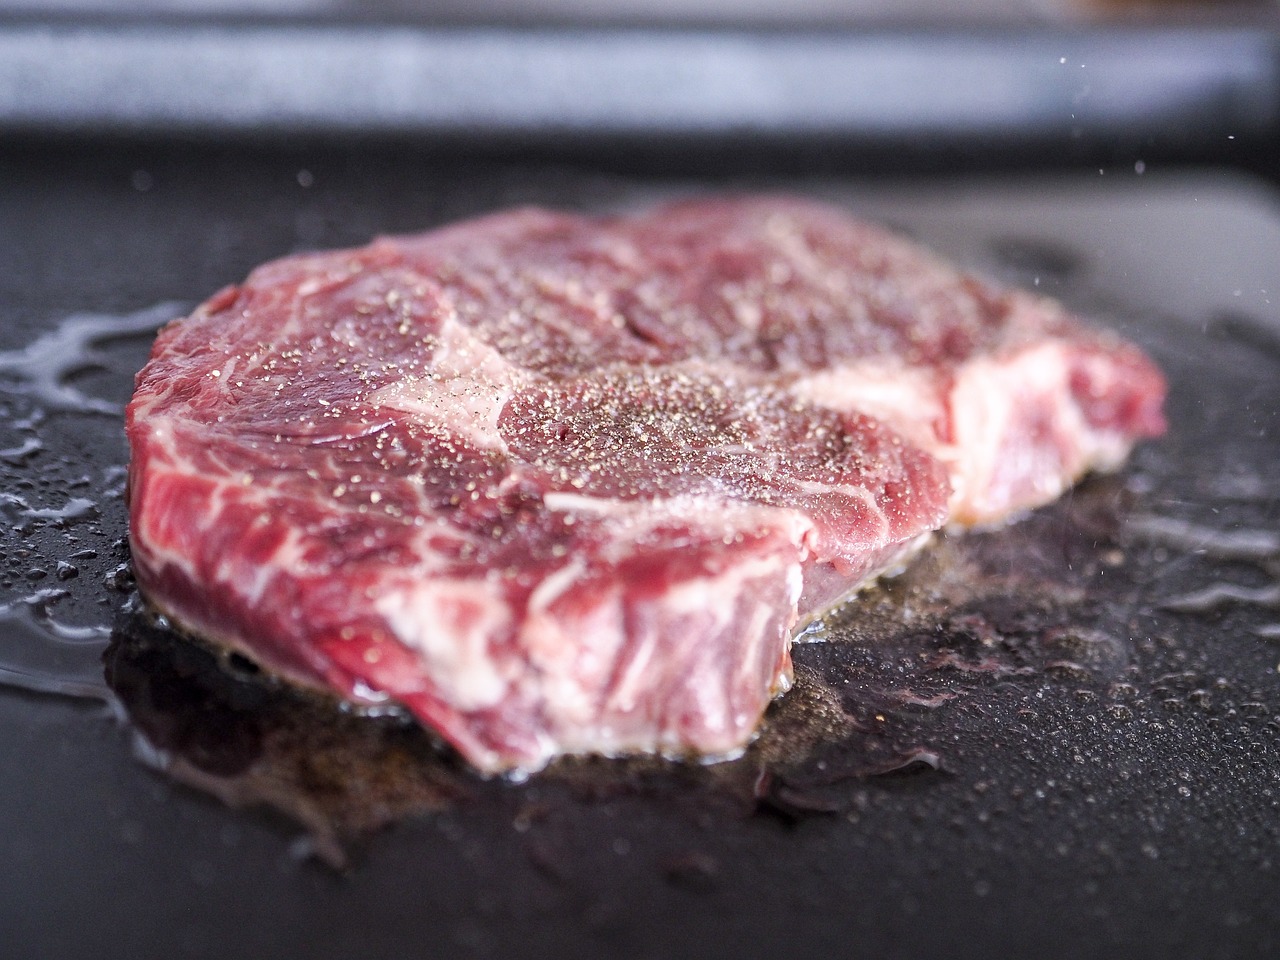 a close up of a piece of meat on a grill, flattened, food blog photo, close-up shot taken from behind, steak